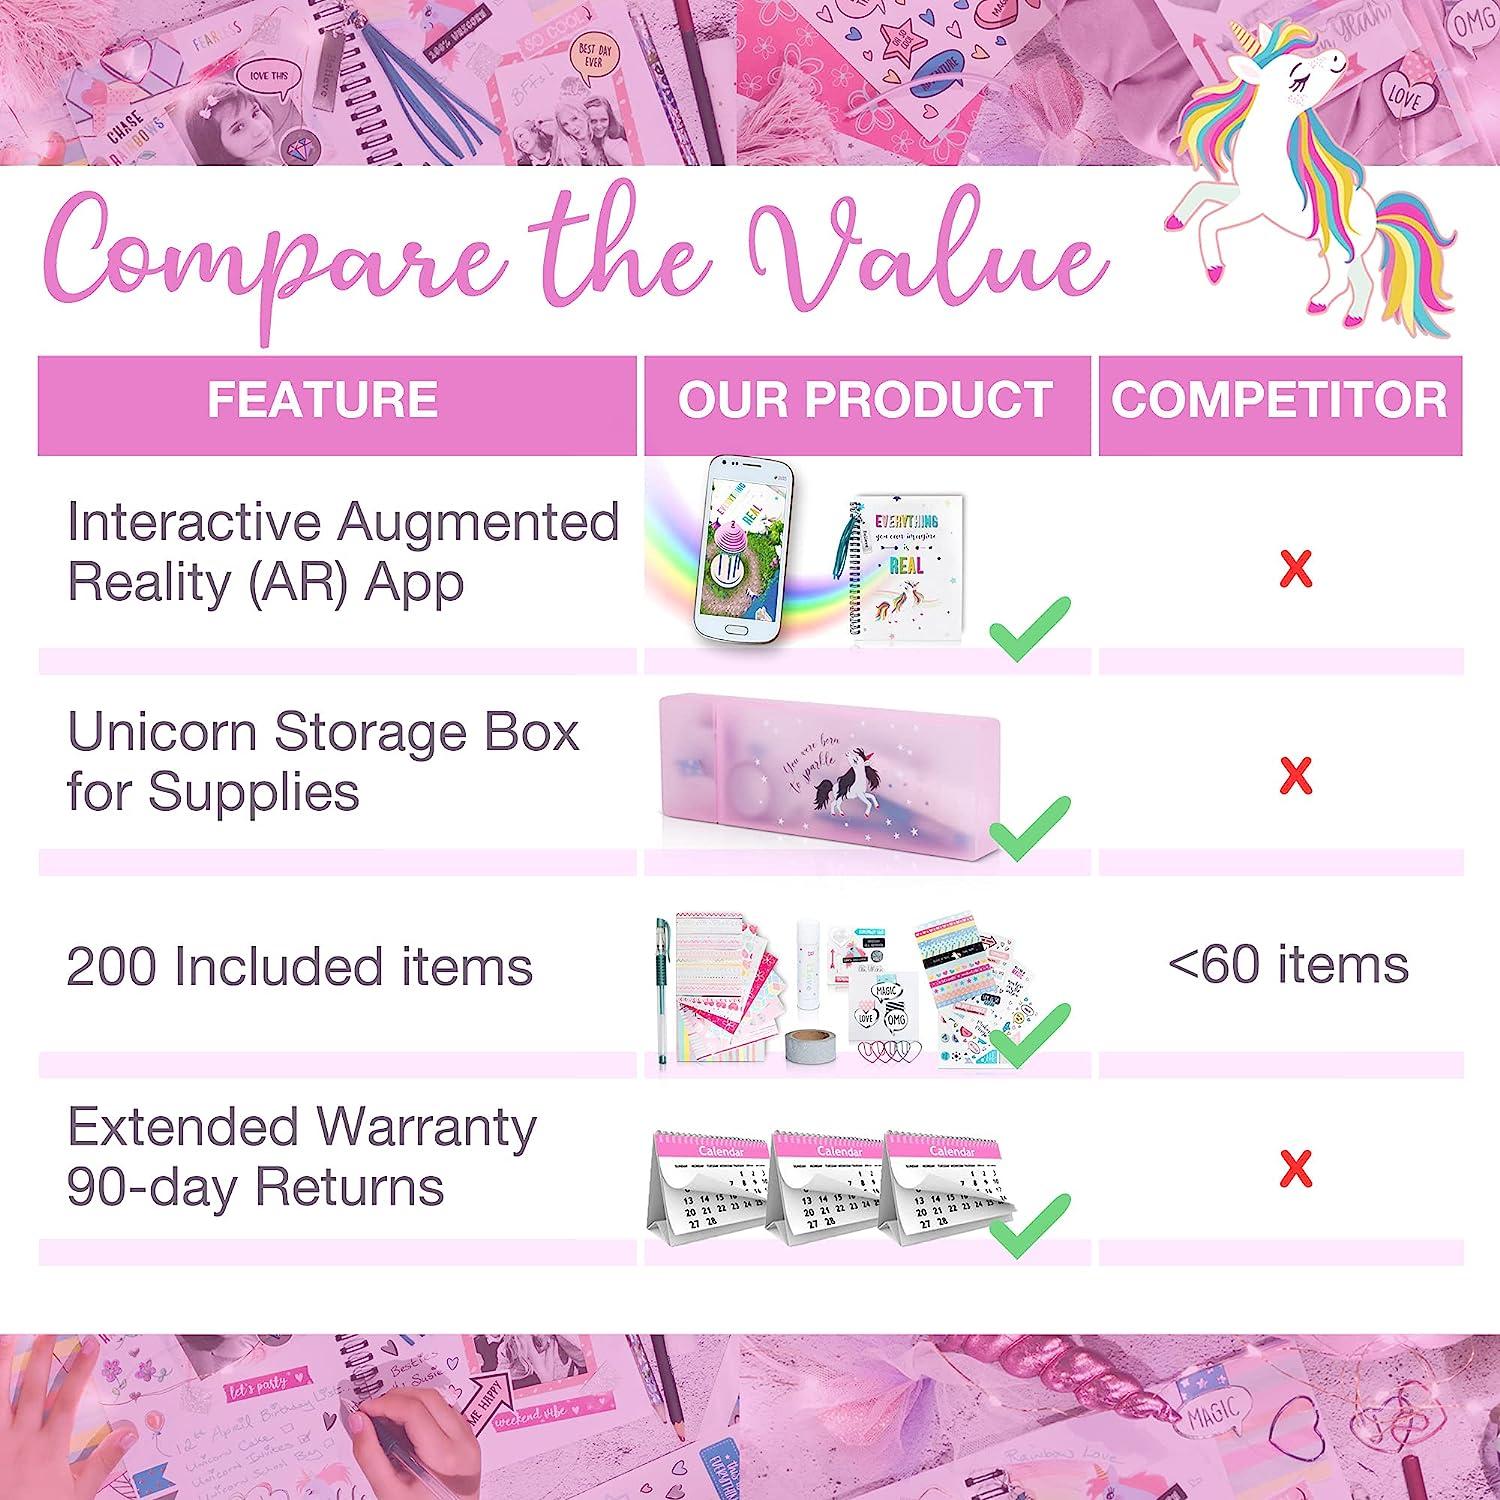 DIY Unicorn Journaling Set/Scrapbook Kit for Girls - Includes Scrapbooking Supplies Plus Augmented Reality Experience (Stem Toys) Use As Kids